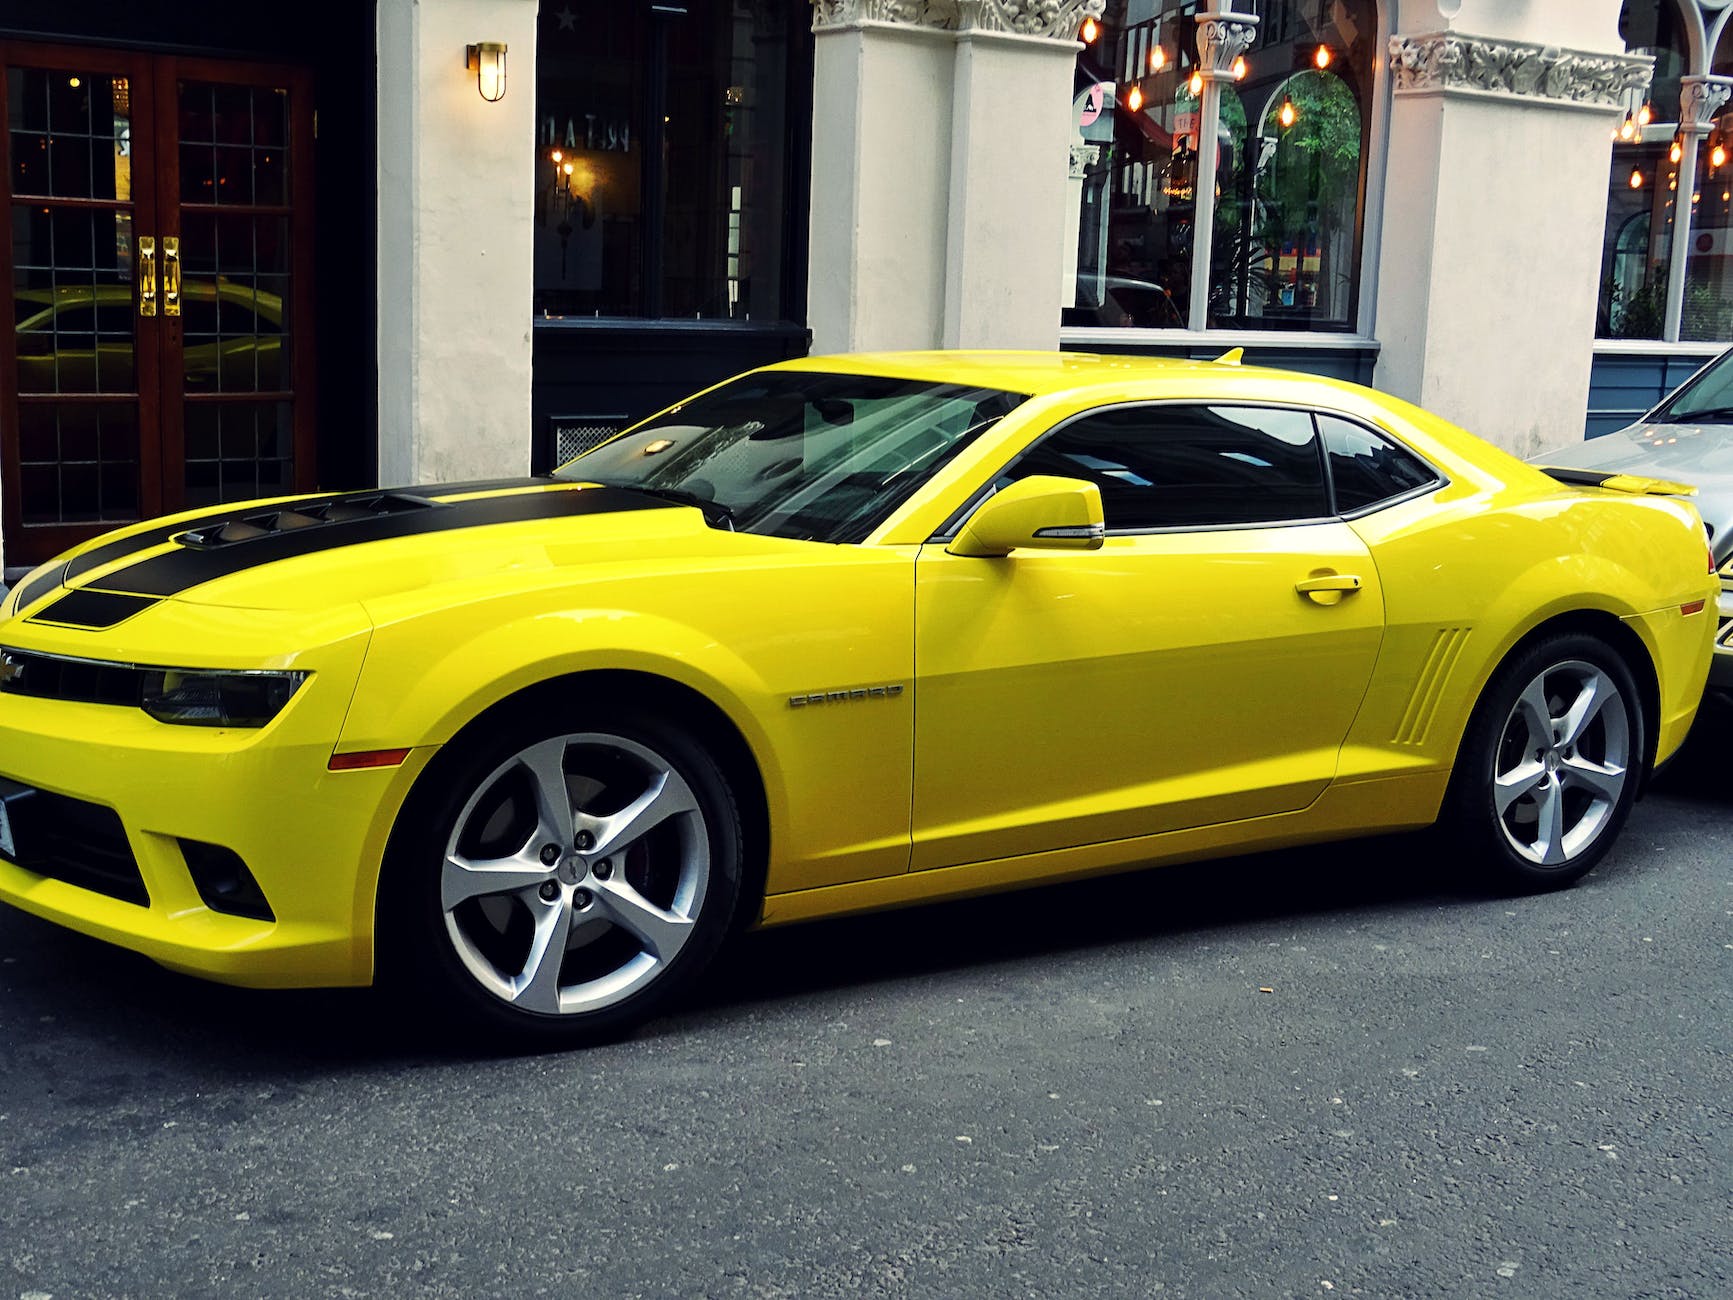 yellow chevroelt camaro parked outside of building